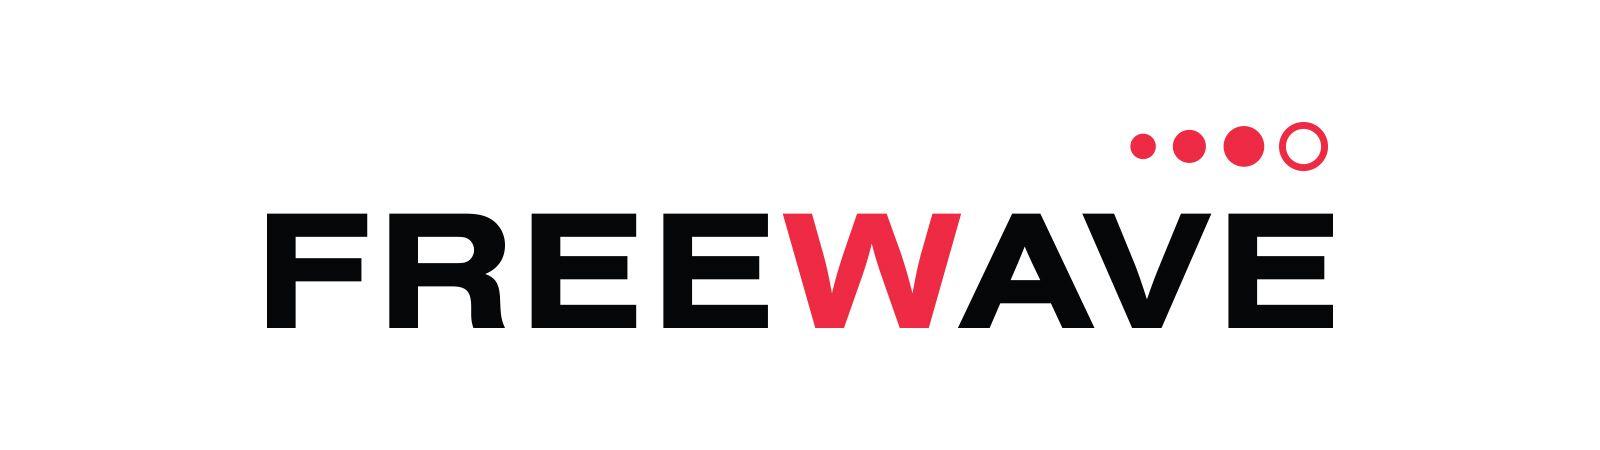 FreeWave Logo - FreeWave Technologies. Technology Sector. TA. A Private Equity Firm